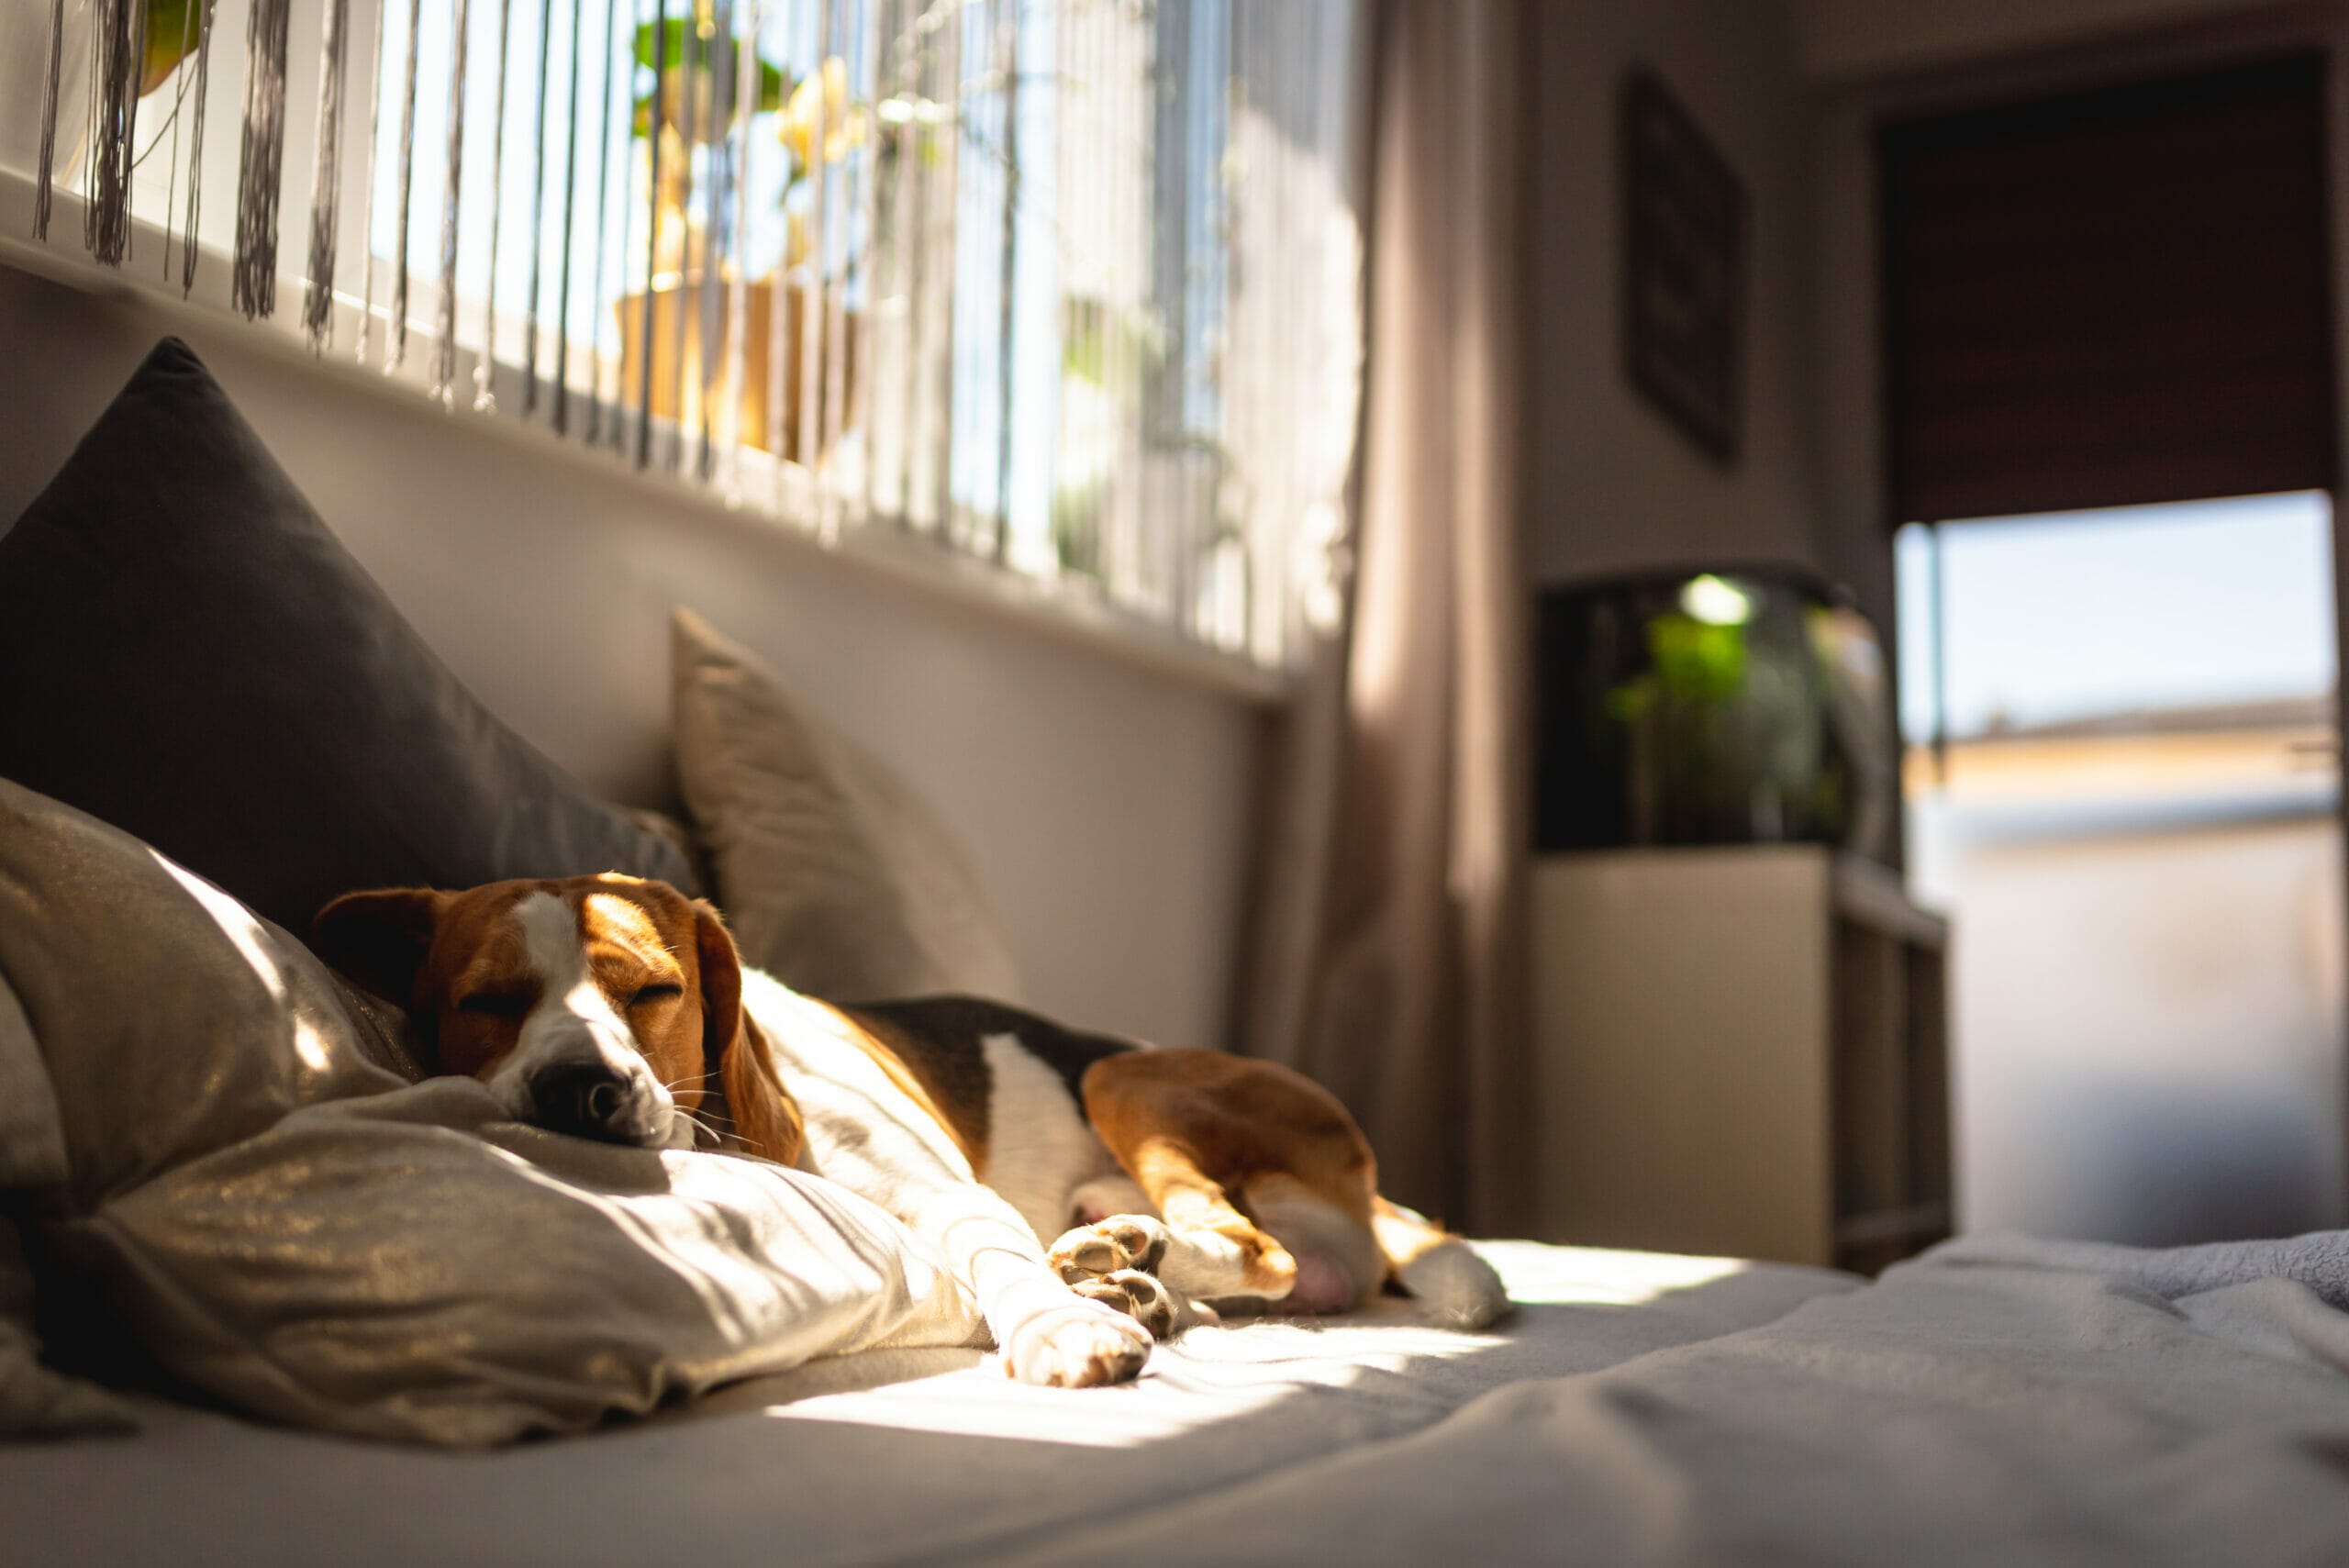 What are signs you should look out for in your dog's sleep?